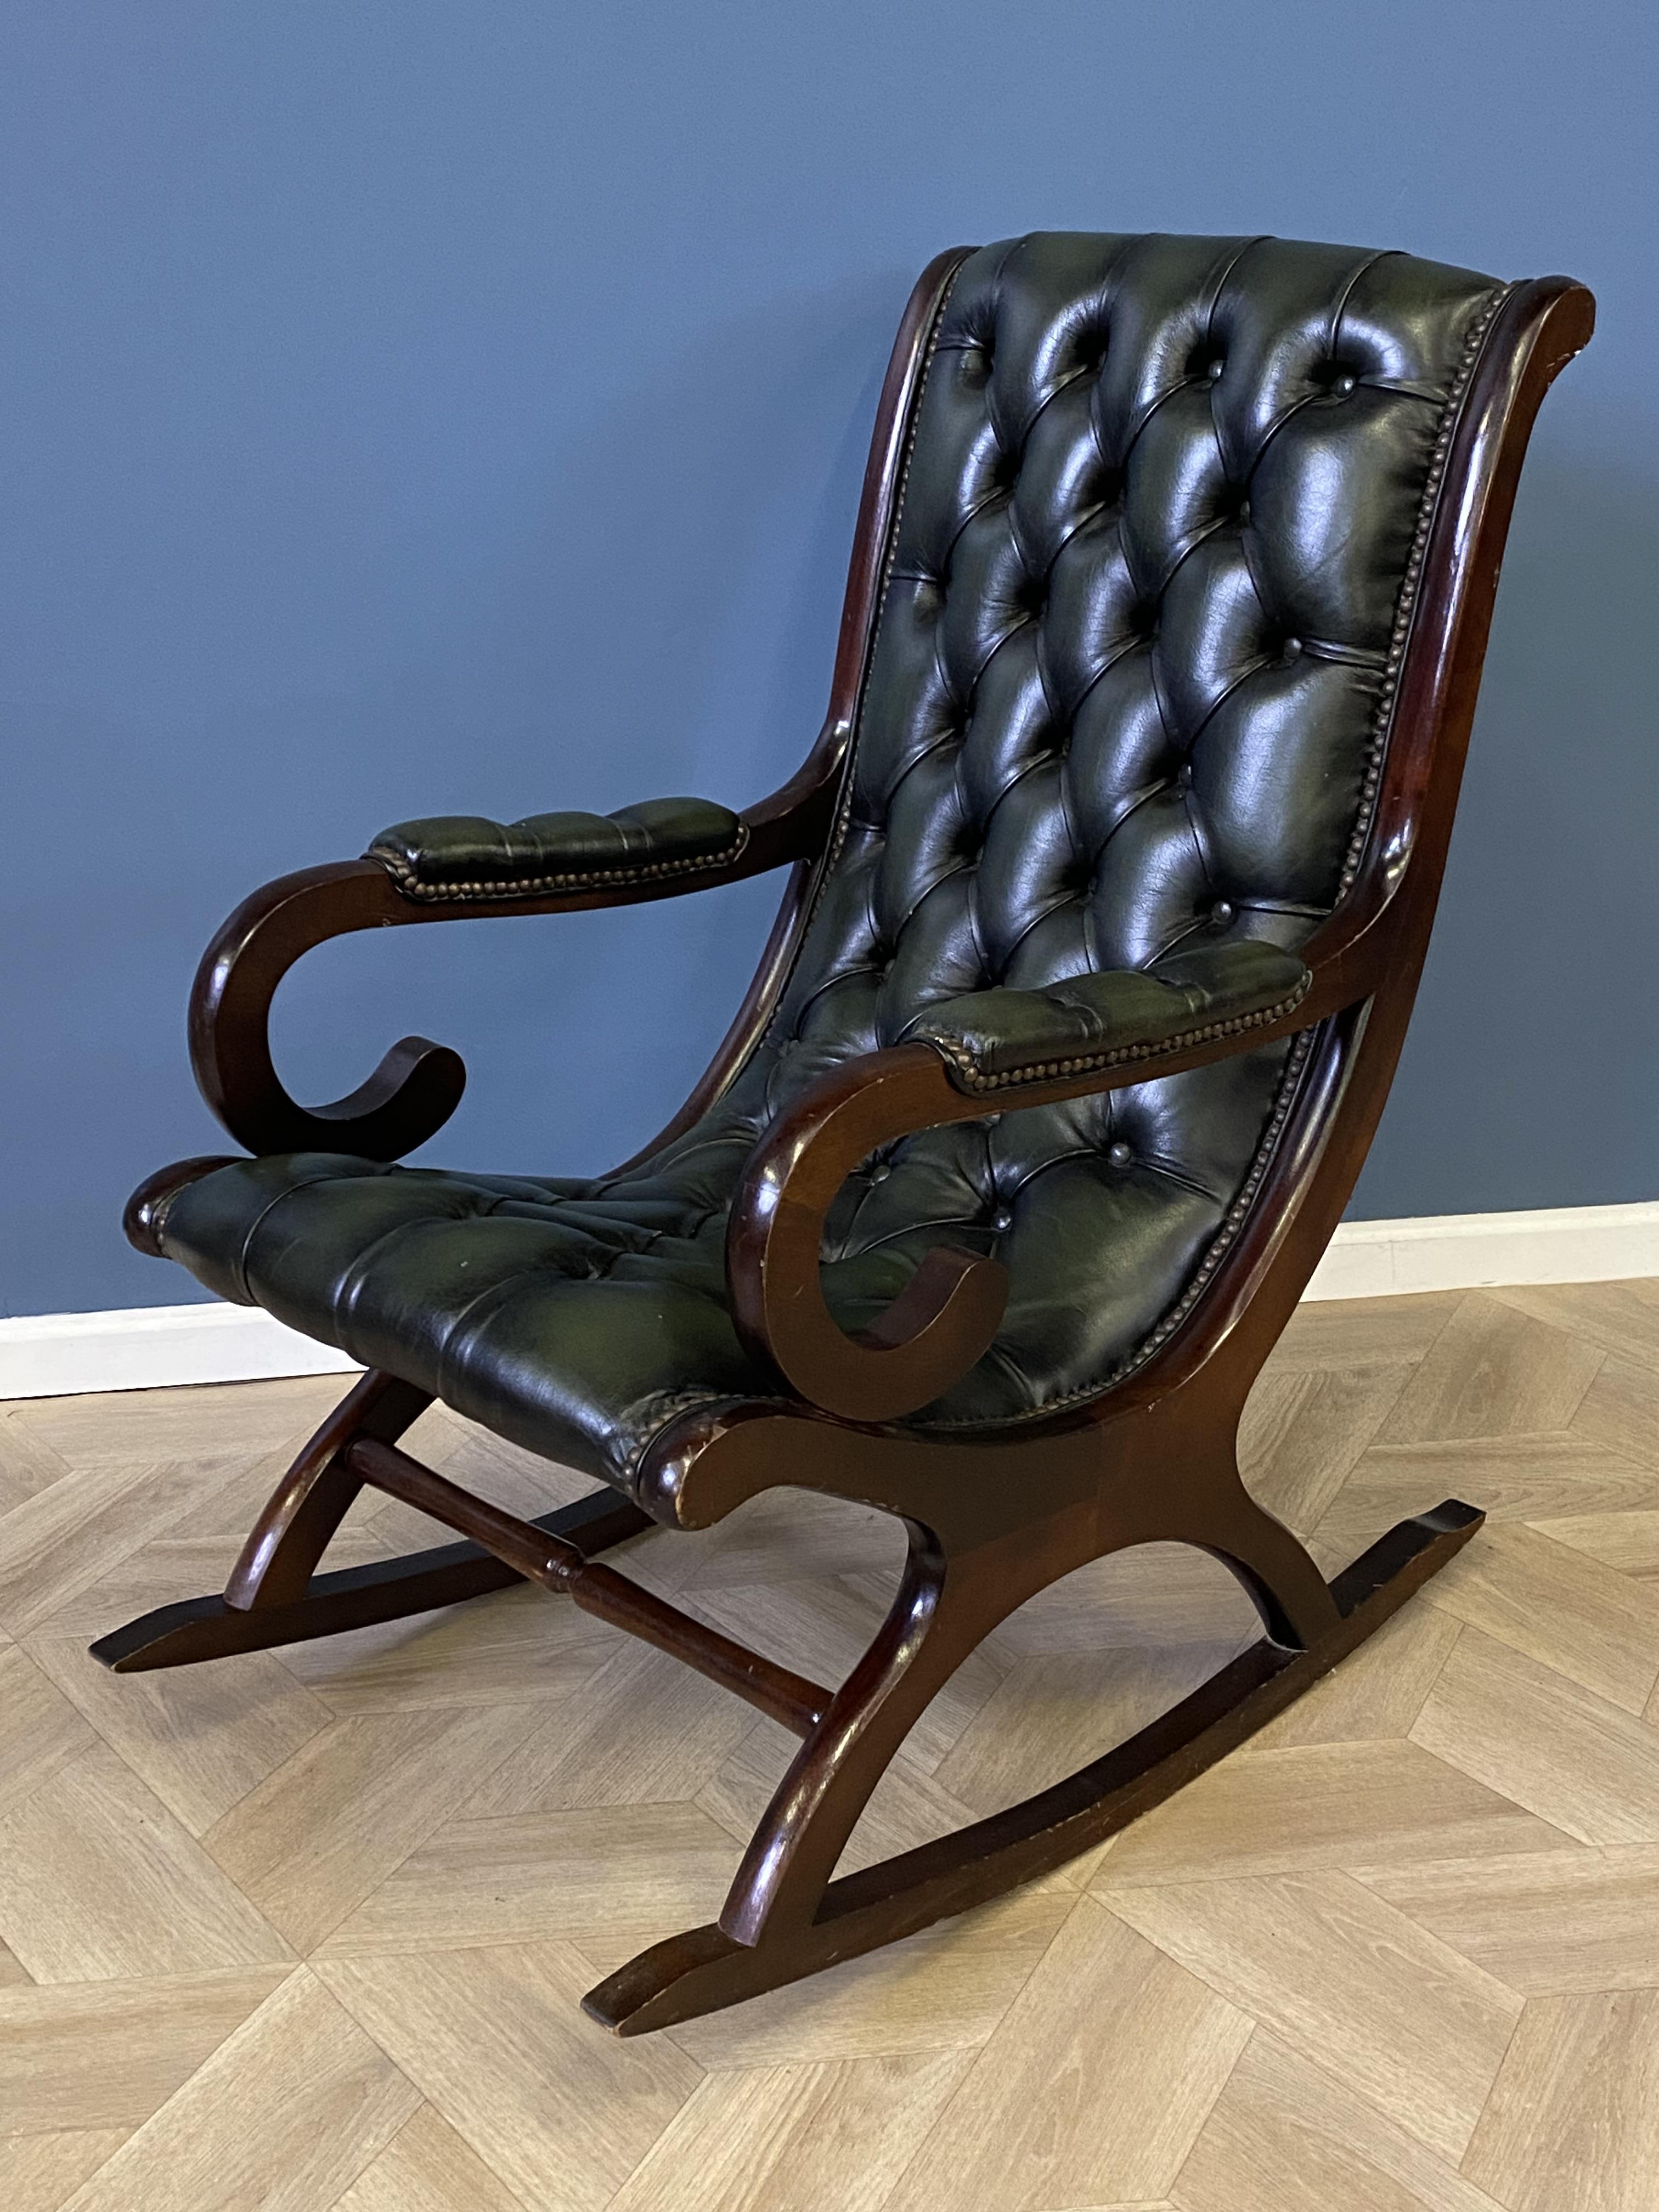 Mahogany framed green leather button back rocking chair - Image 3 of 7